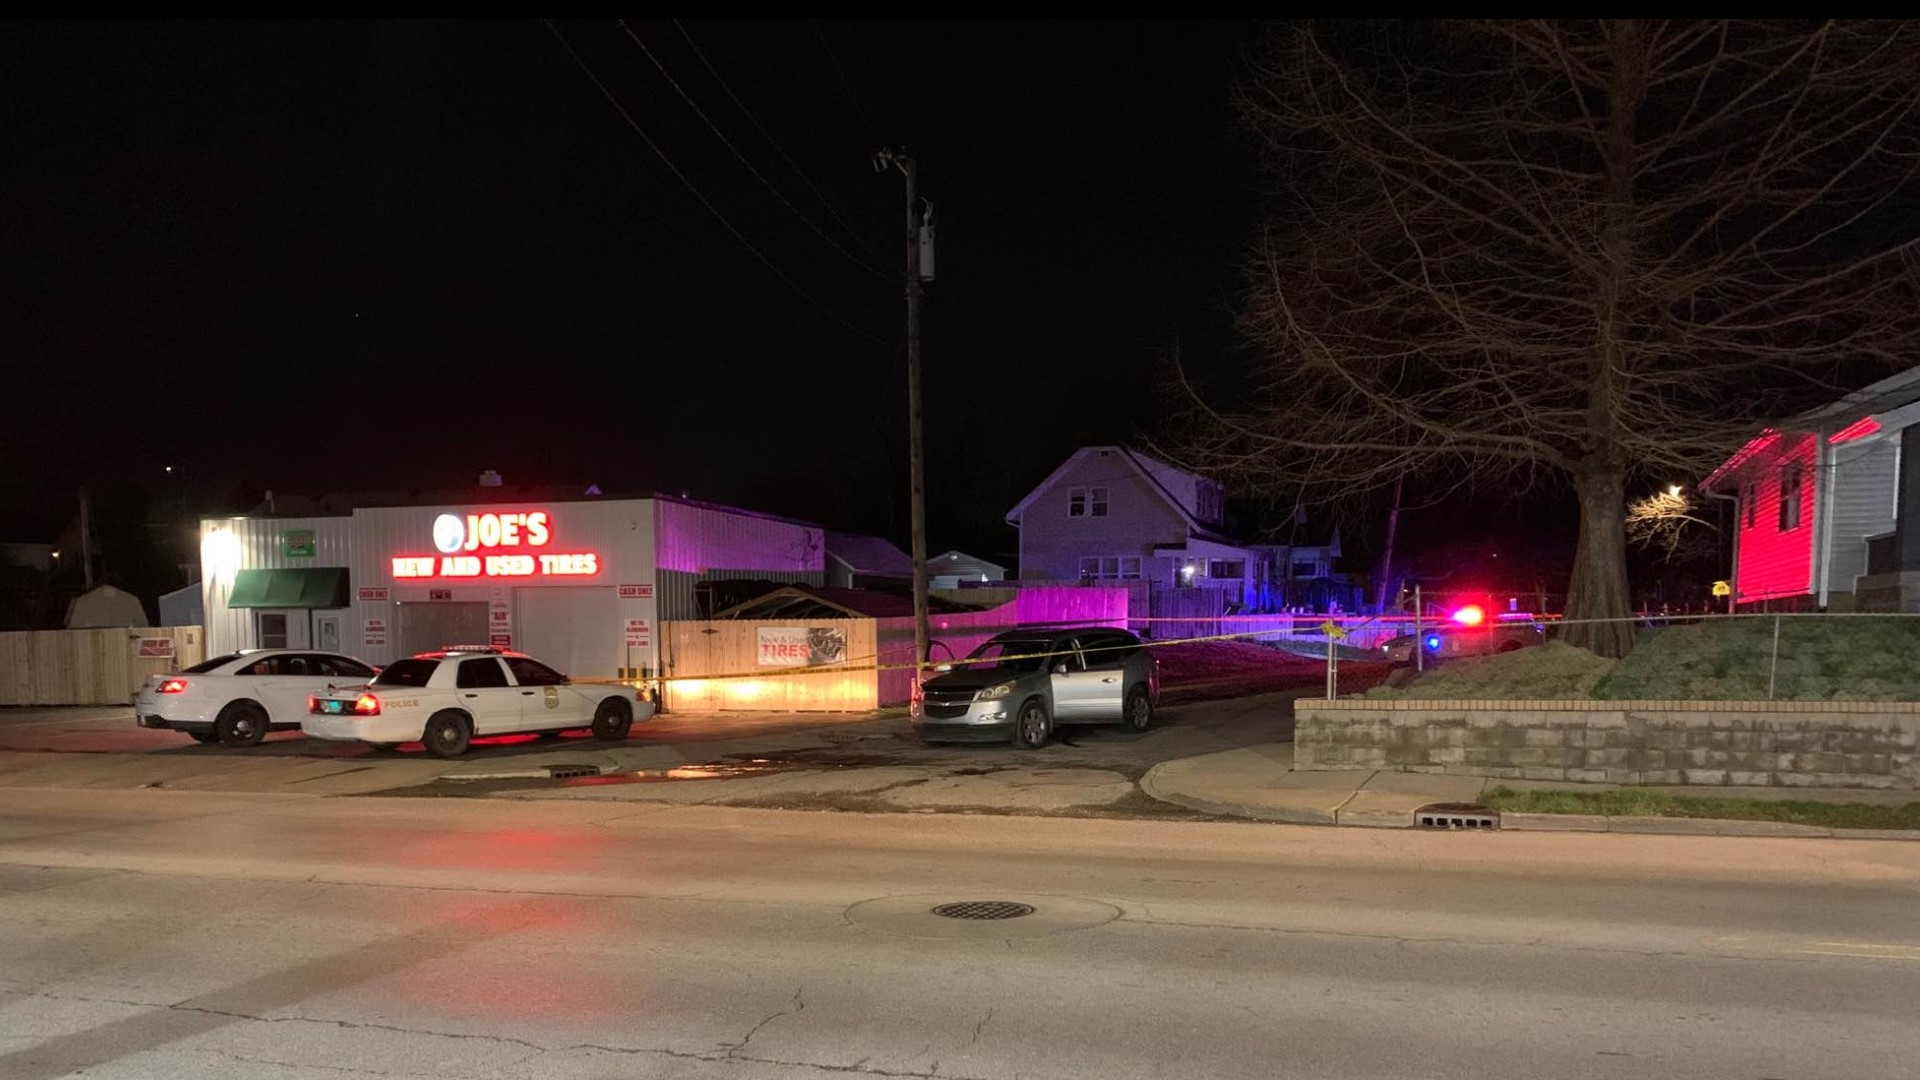 The shooting was reported around 11:30 p.m. Monday.